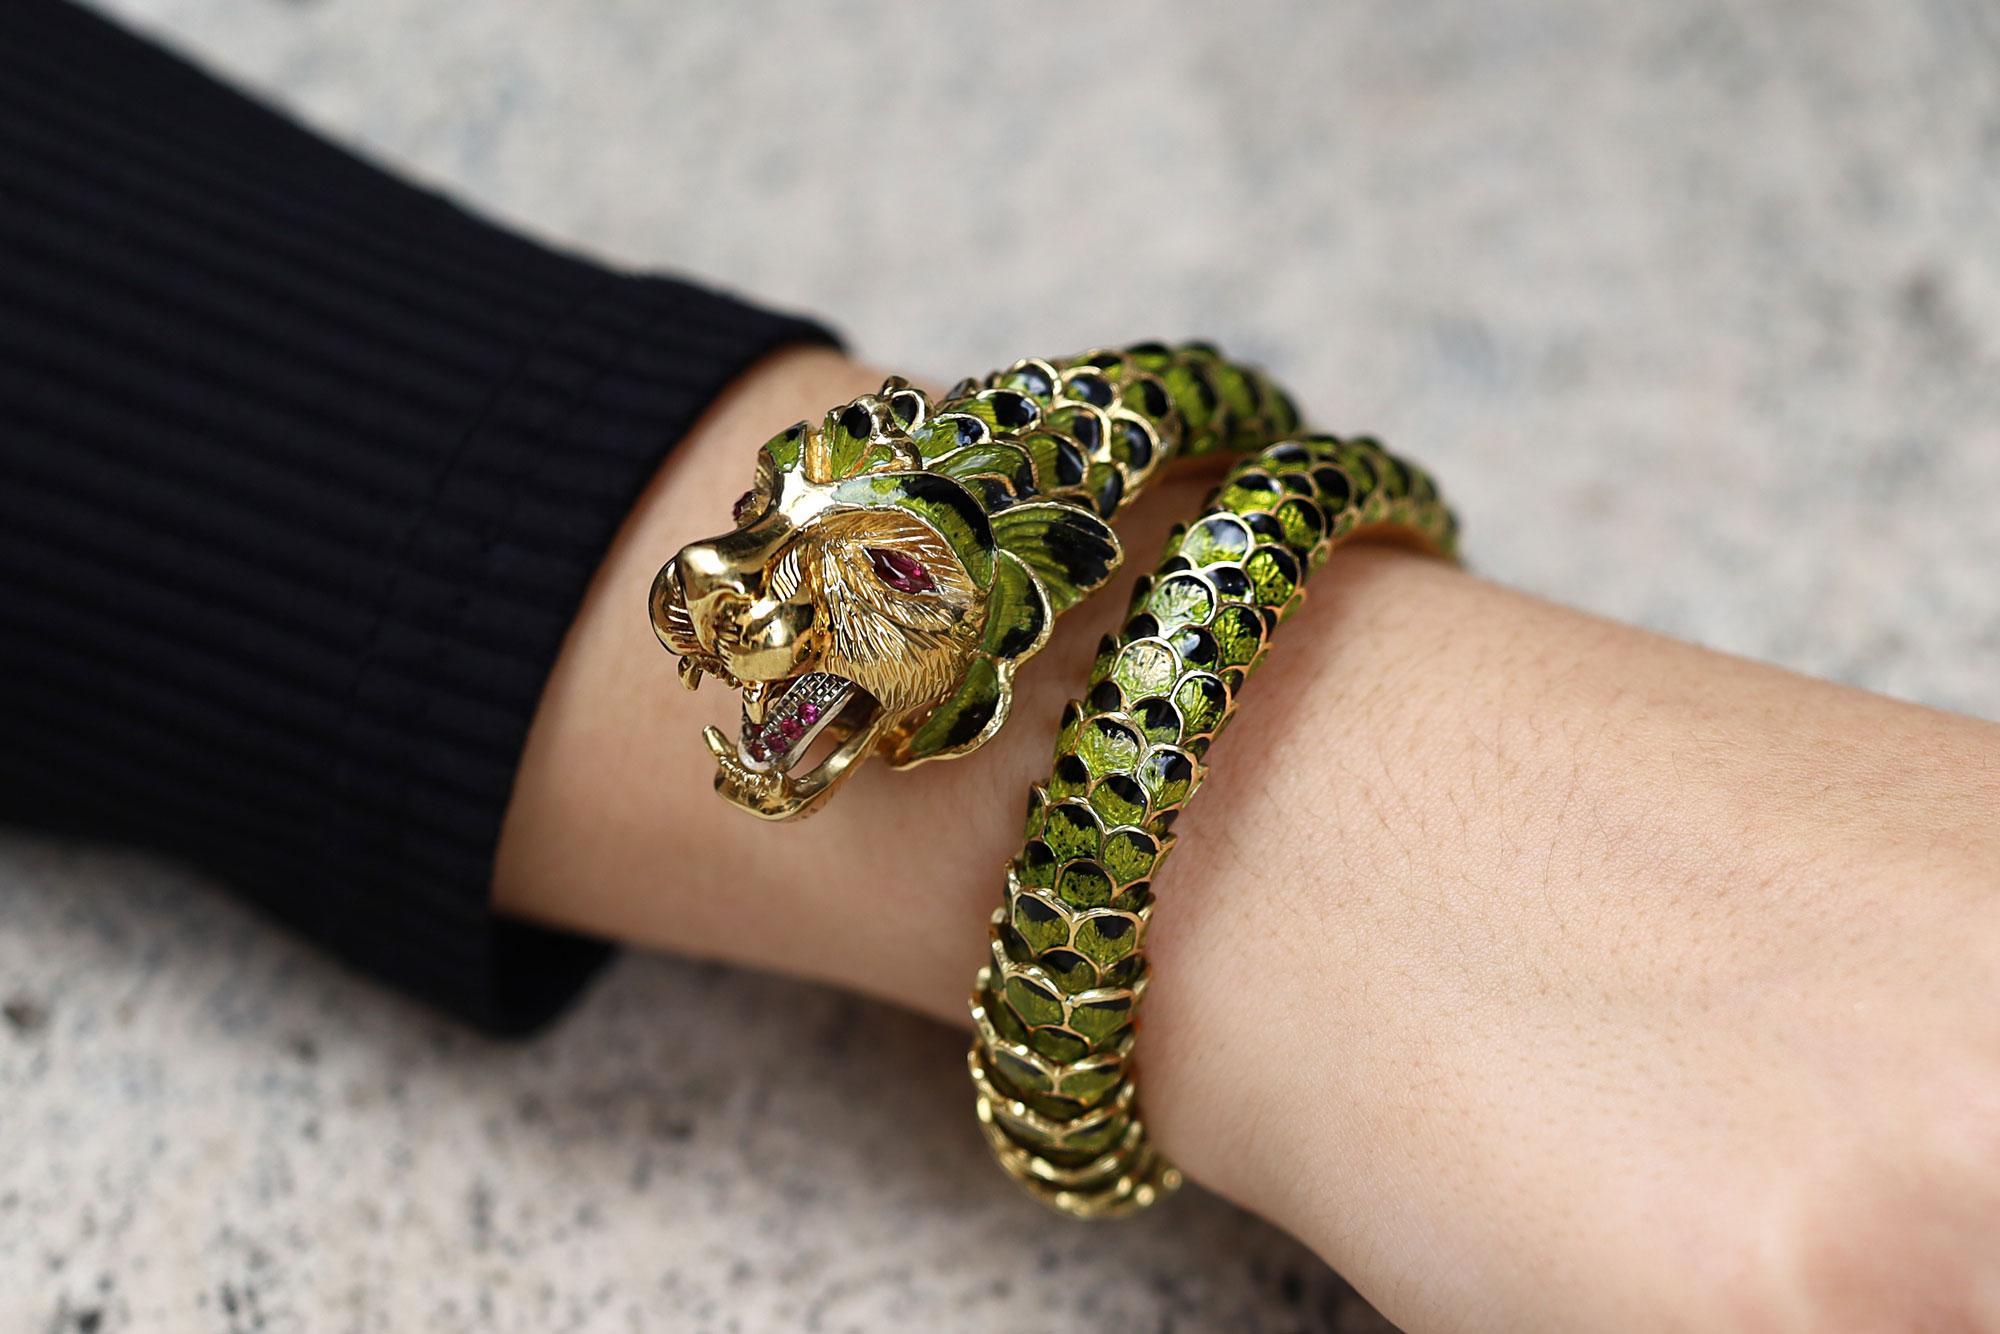 Just in time for the Year of the Dragon, this 1960s vintage vivid green enamel bracelet comes to life. With great attention to detail and 5 1/2 ounces of luxurious 18k yellow gold, this articulating animal wraps lithely around your wrist. With the